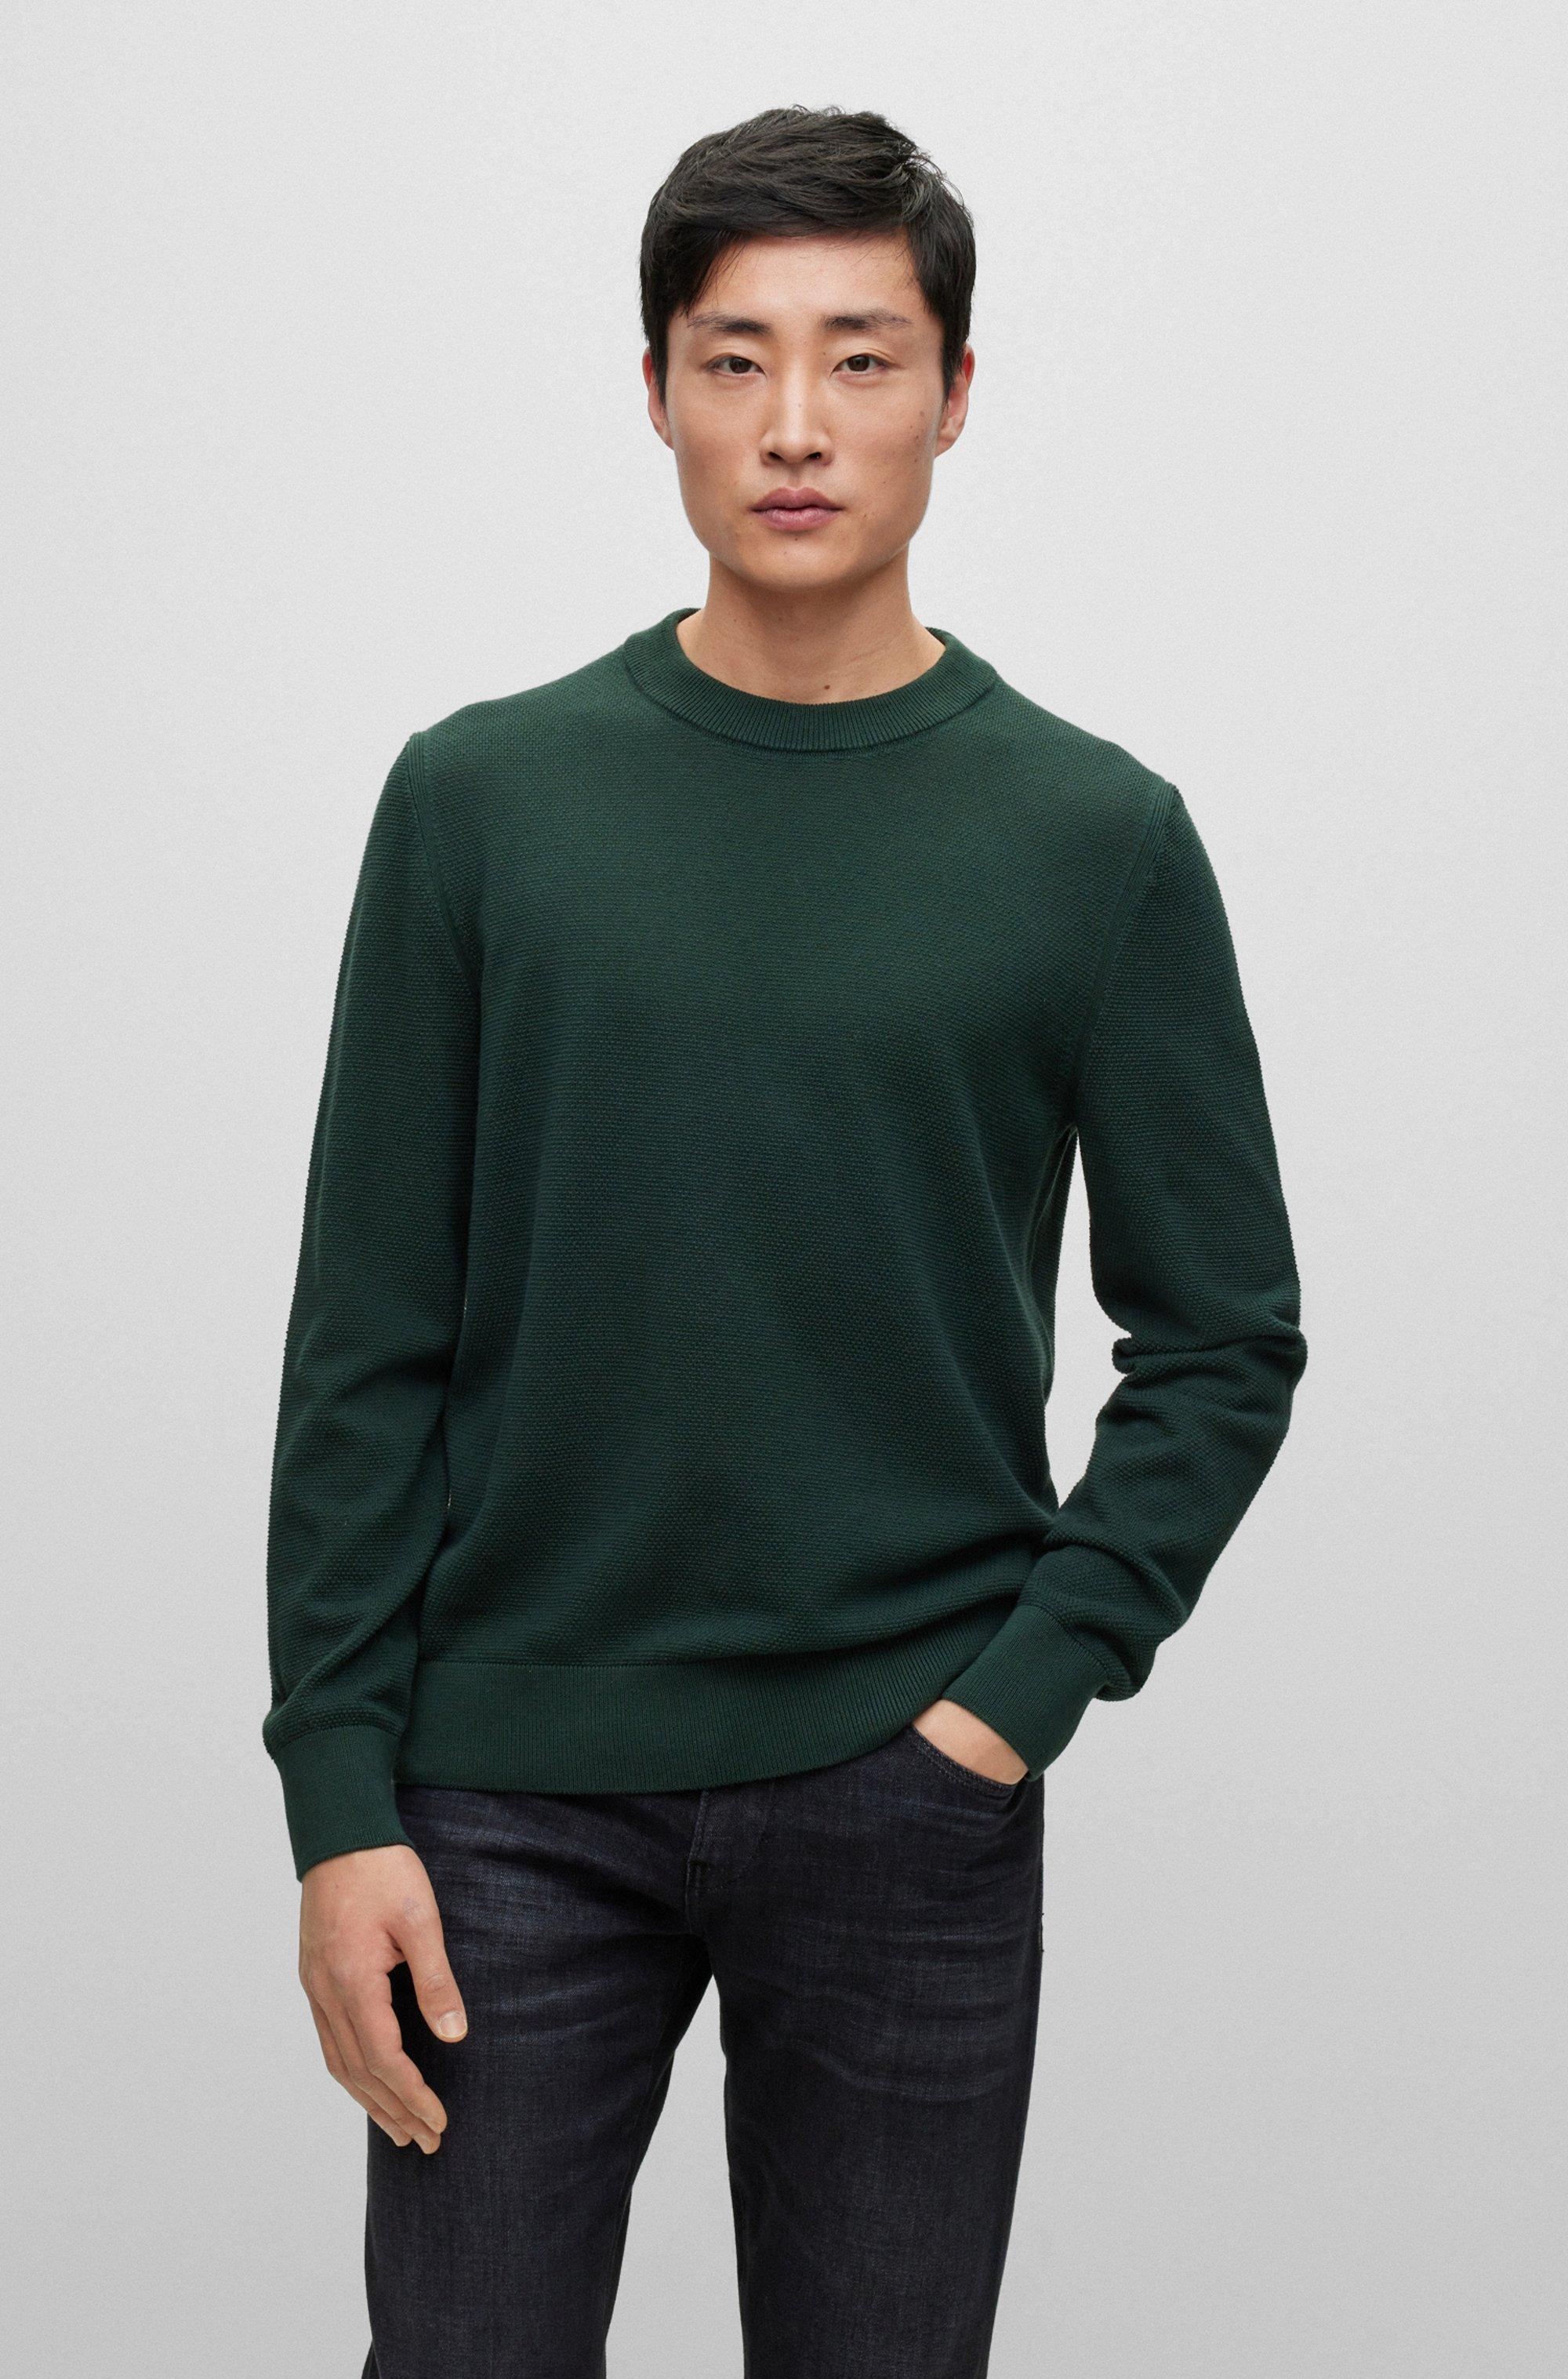 BOSS Crew-neck Sweater In Structured Cotton With Stripe Details in Green  for Men | Lyst